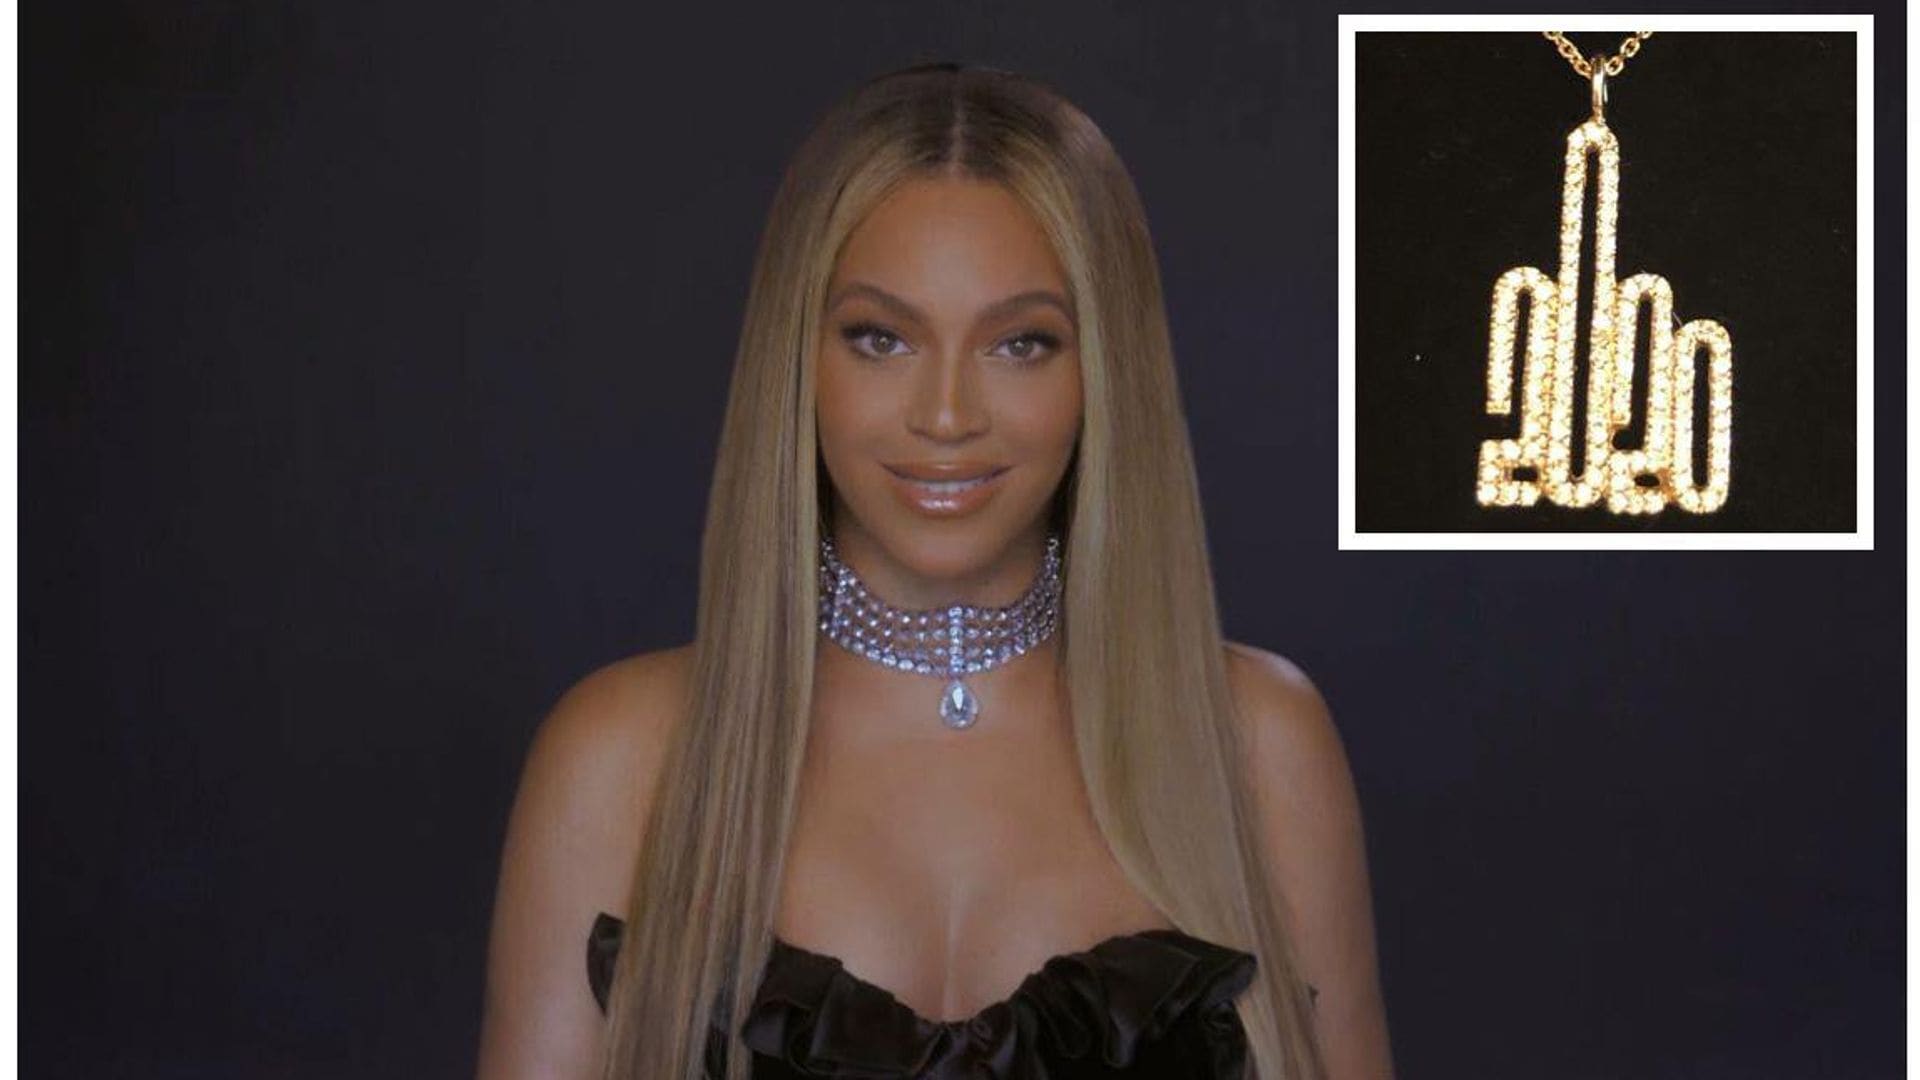 Find out what Christmas gifts Beyoncé gave to her friends